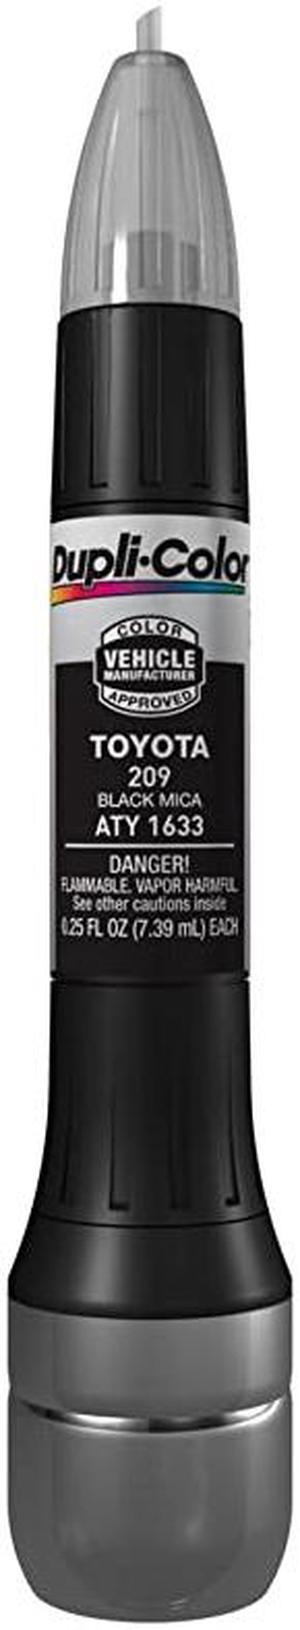 ATY1633 Black Mica Toyota Exact-Match Scratch Fix All-in-1 Touch-Up Paint - 0.5 oz.